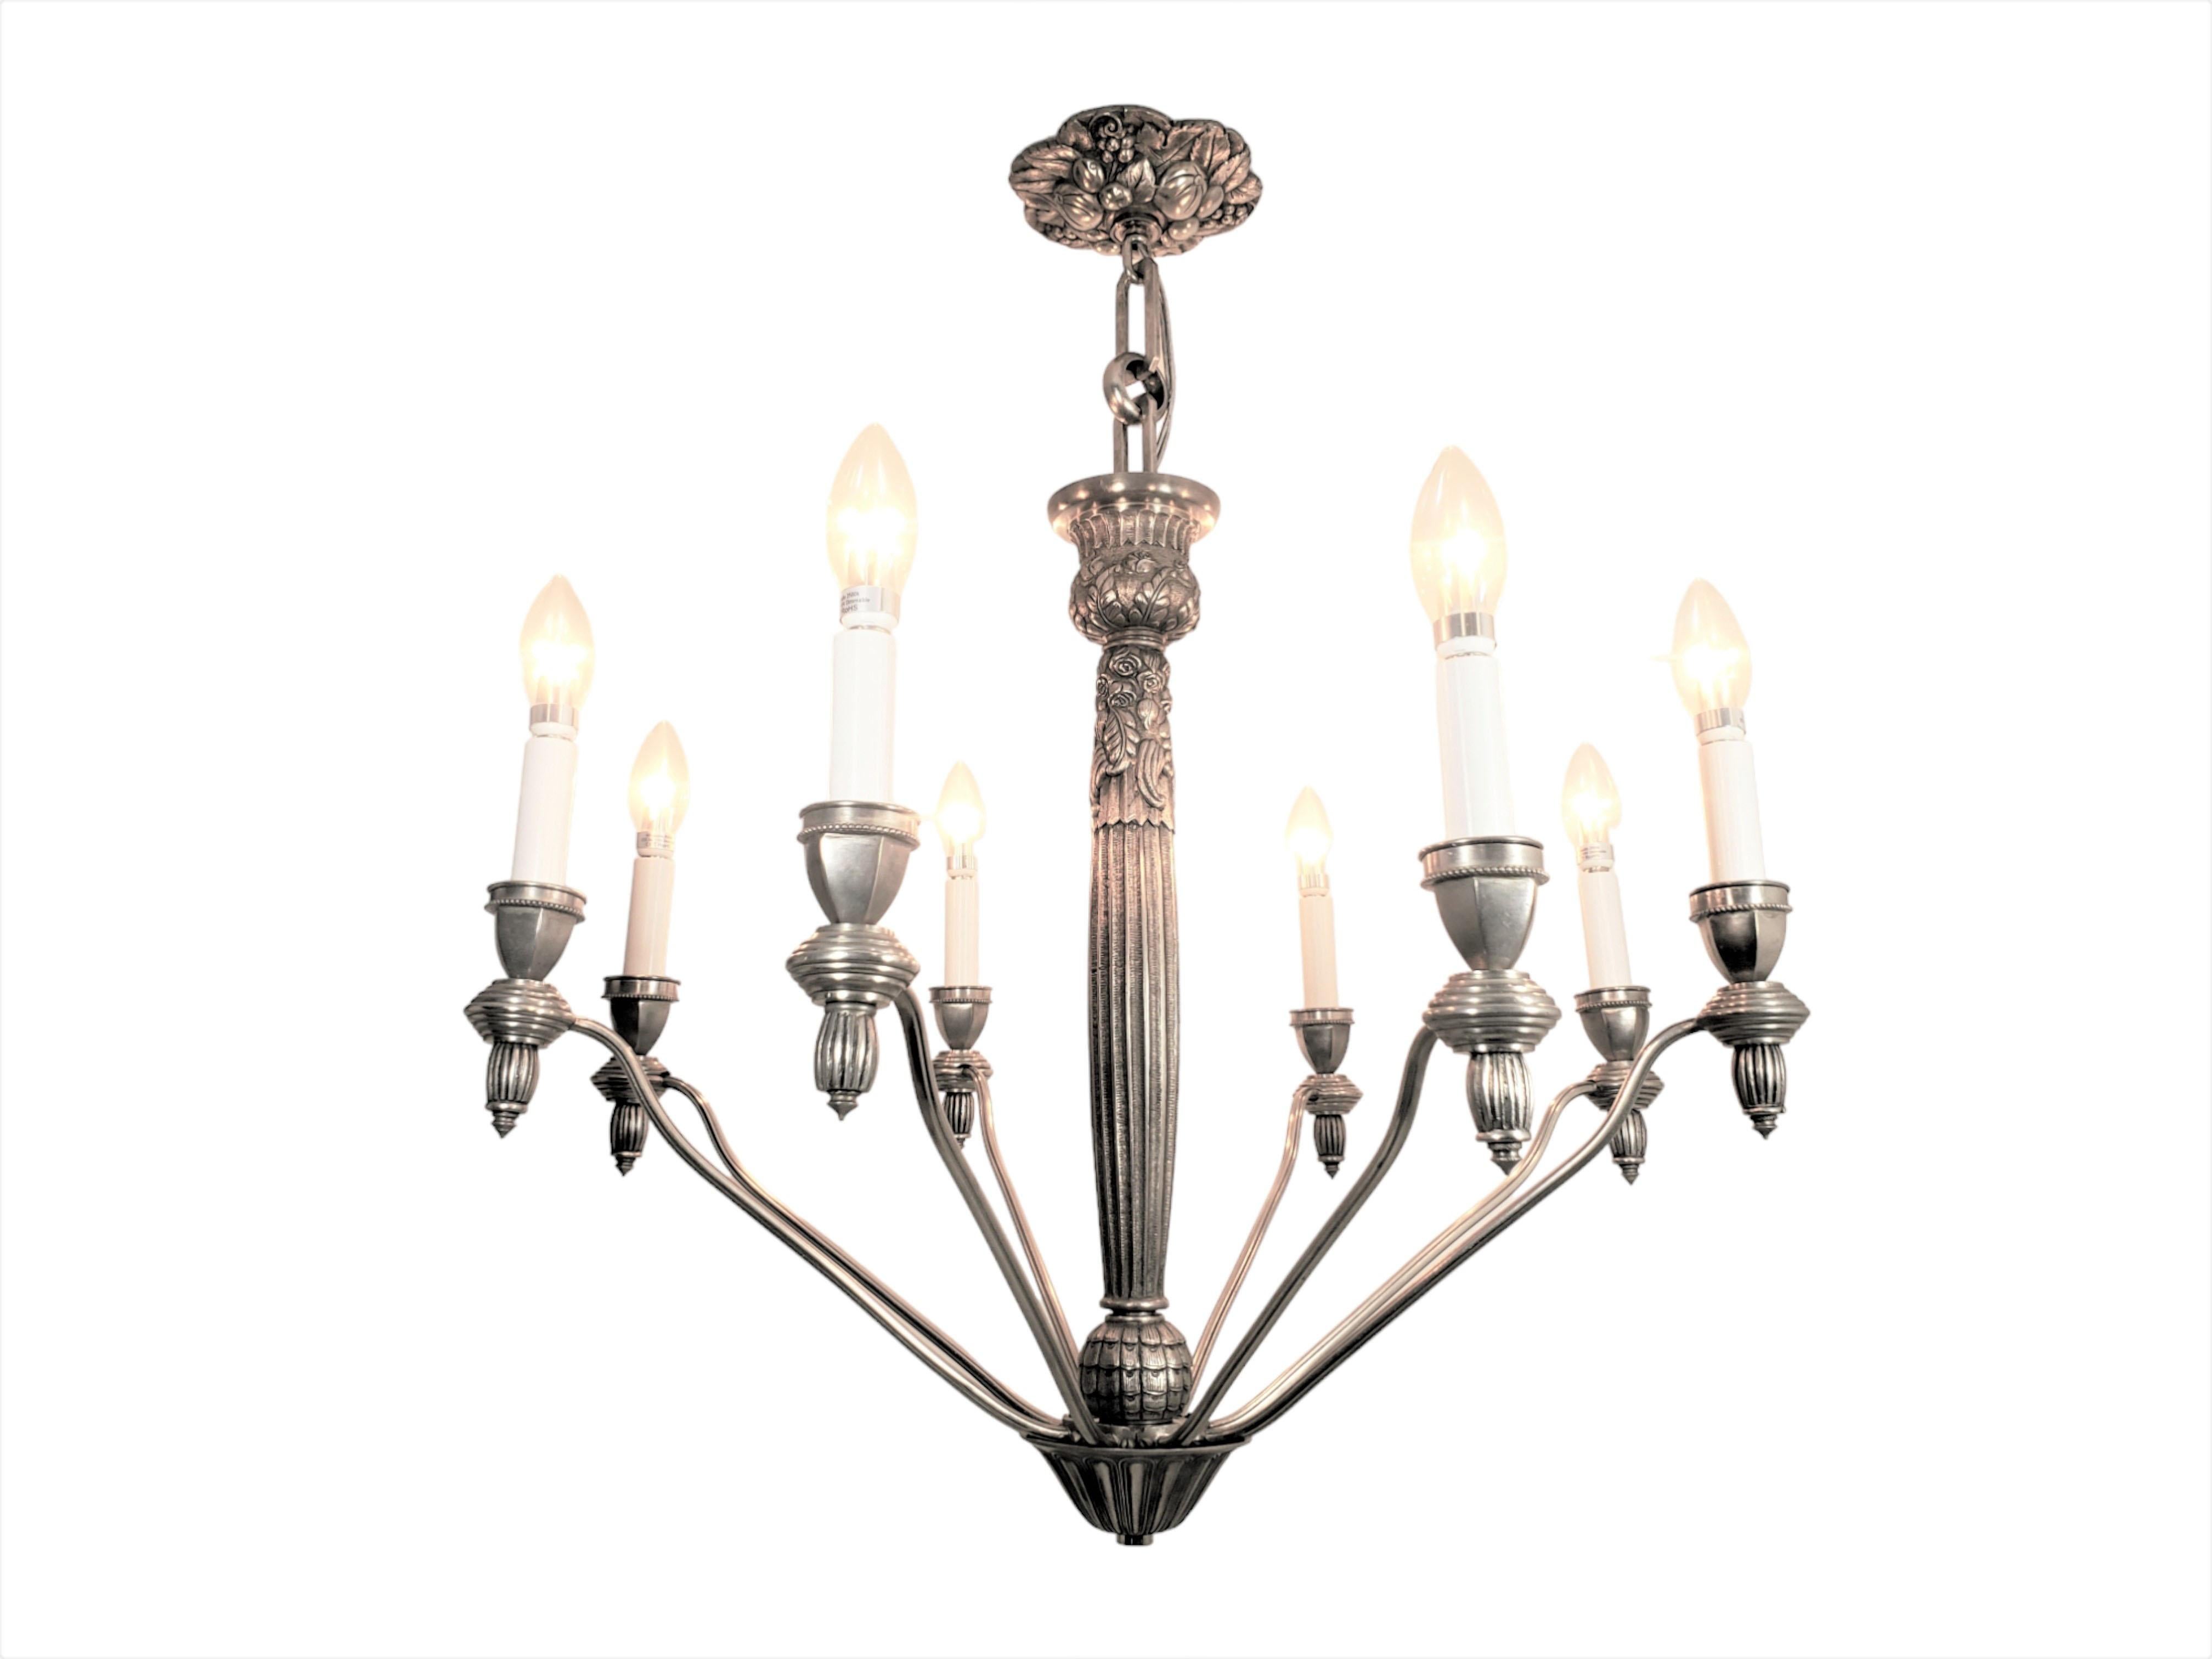 20th Century French eight arm heavily cast and detailed nickeled bronze chandelier - G.Capon  For Sale